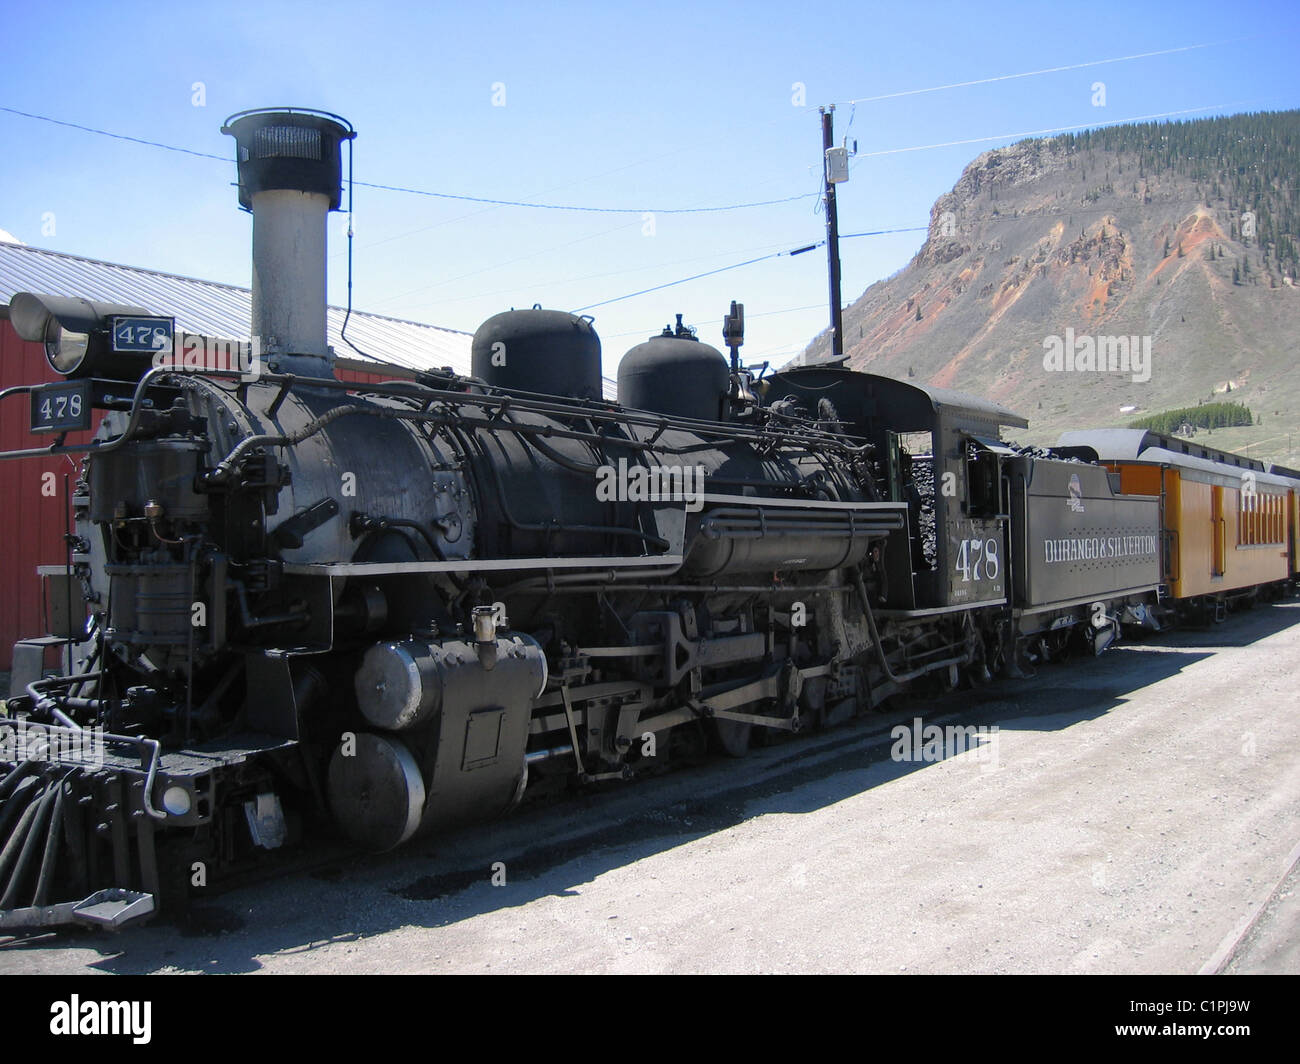 Colorado. A view of a steam locomotive on the Durango and Silverton Railroad, a narrow gauge heritage railroad. Stock Photo